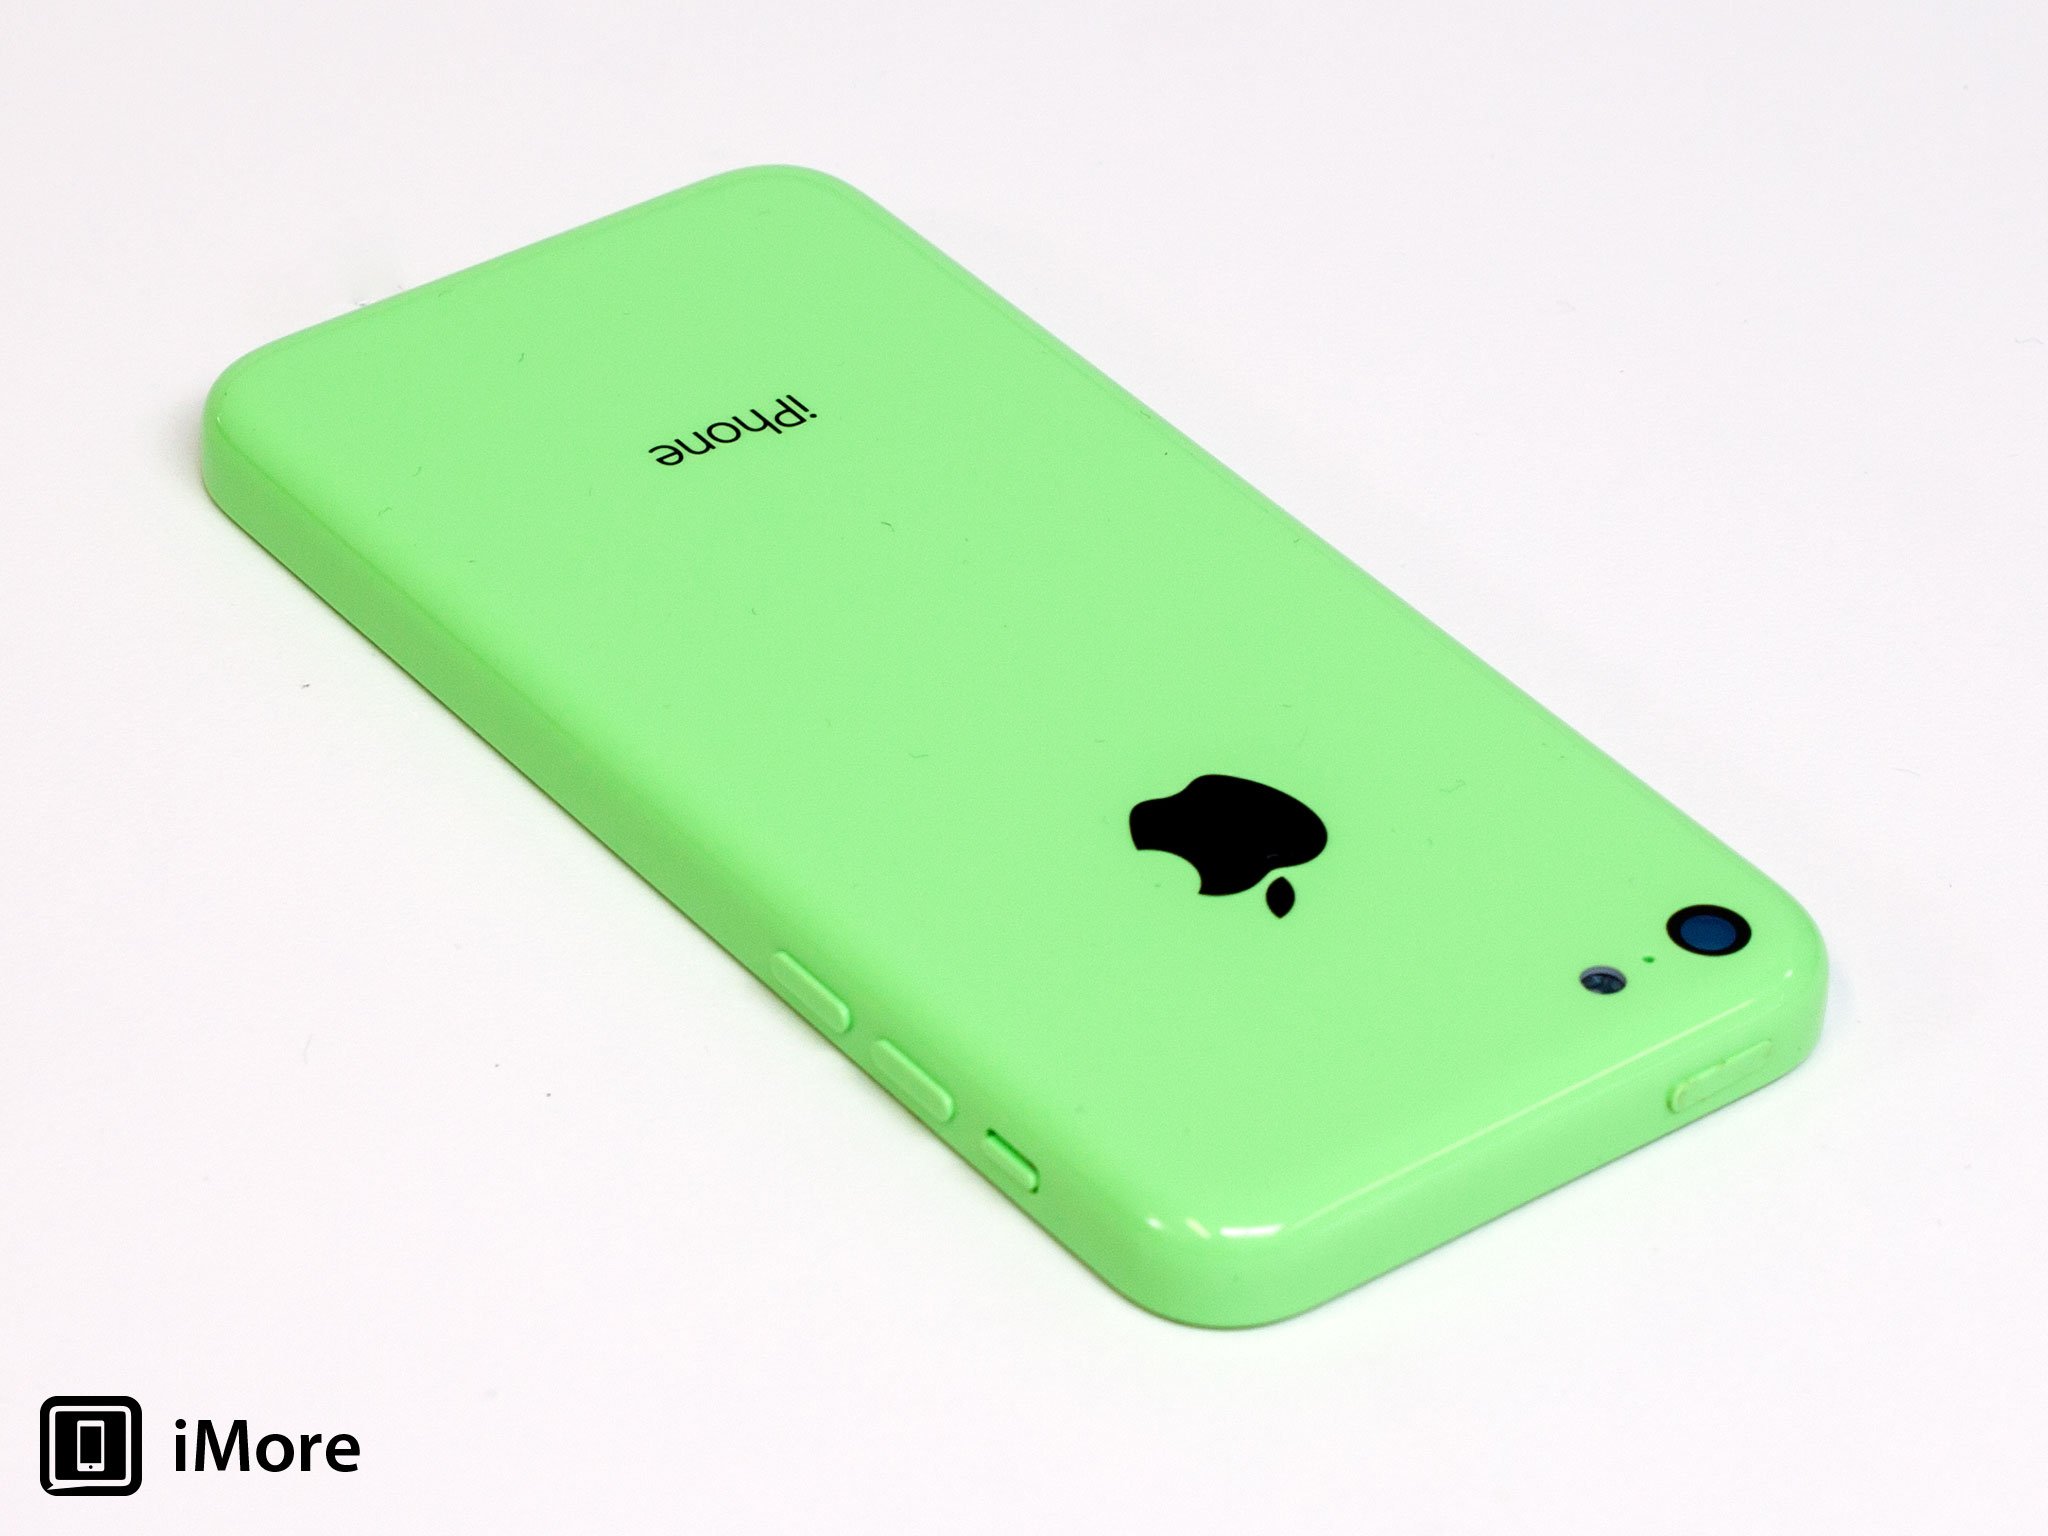 Imagining iPhone 5s and iPhone 5c: Pricing and availability 